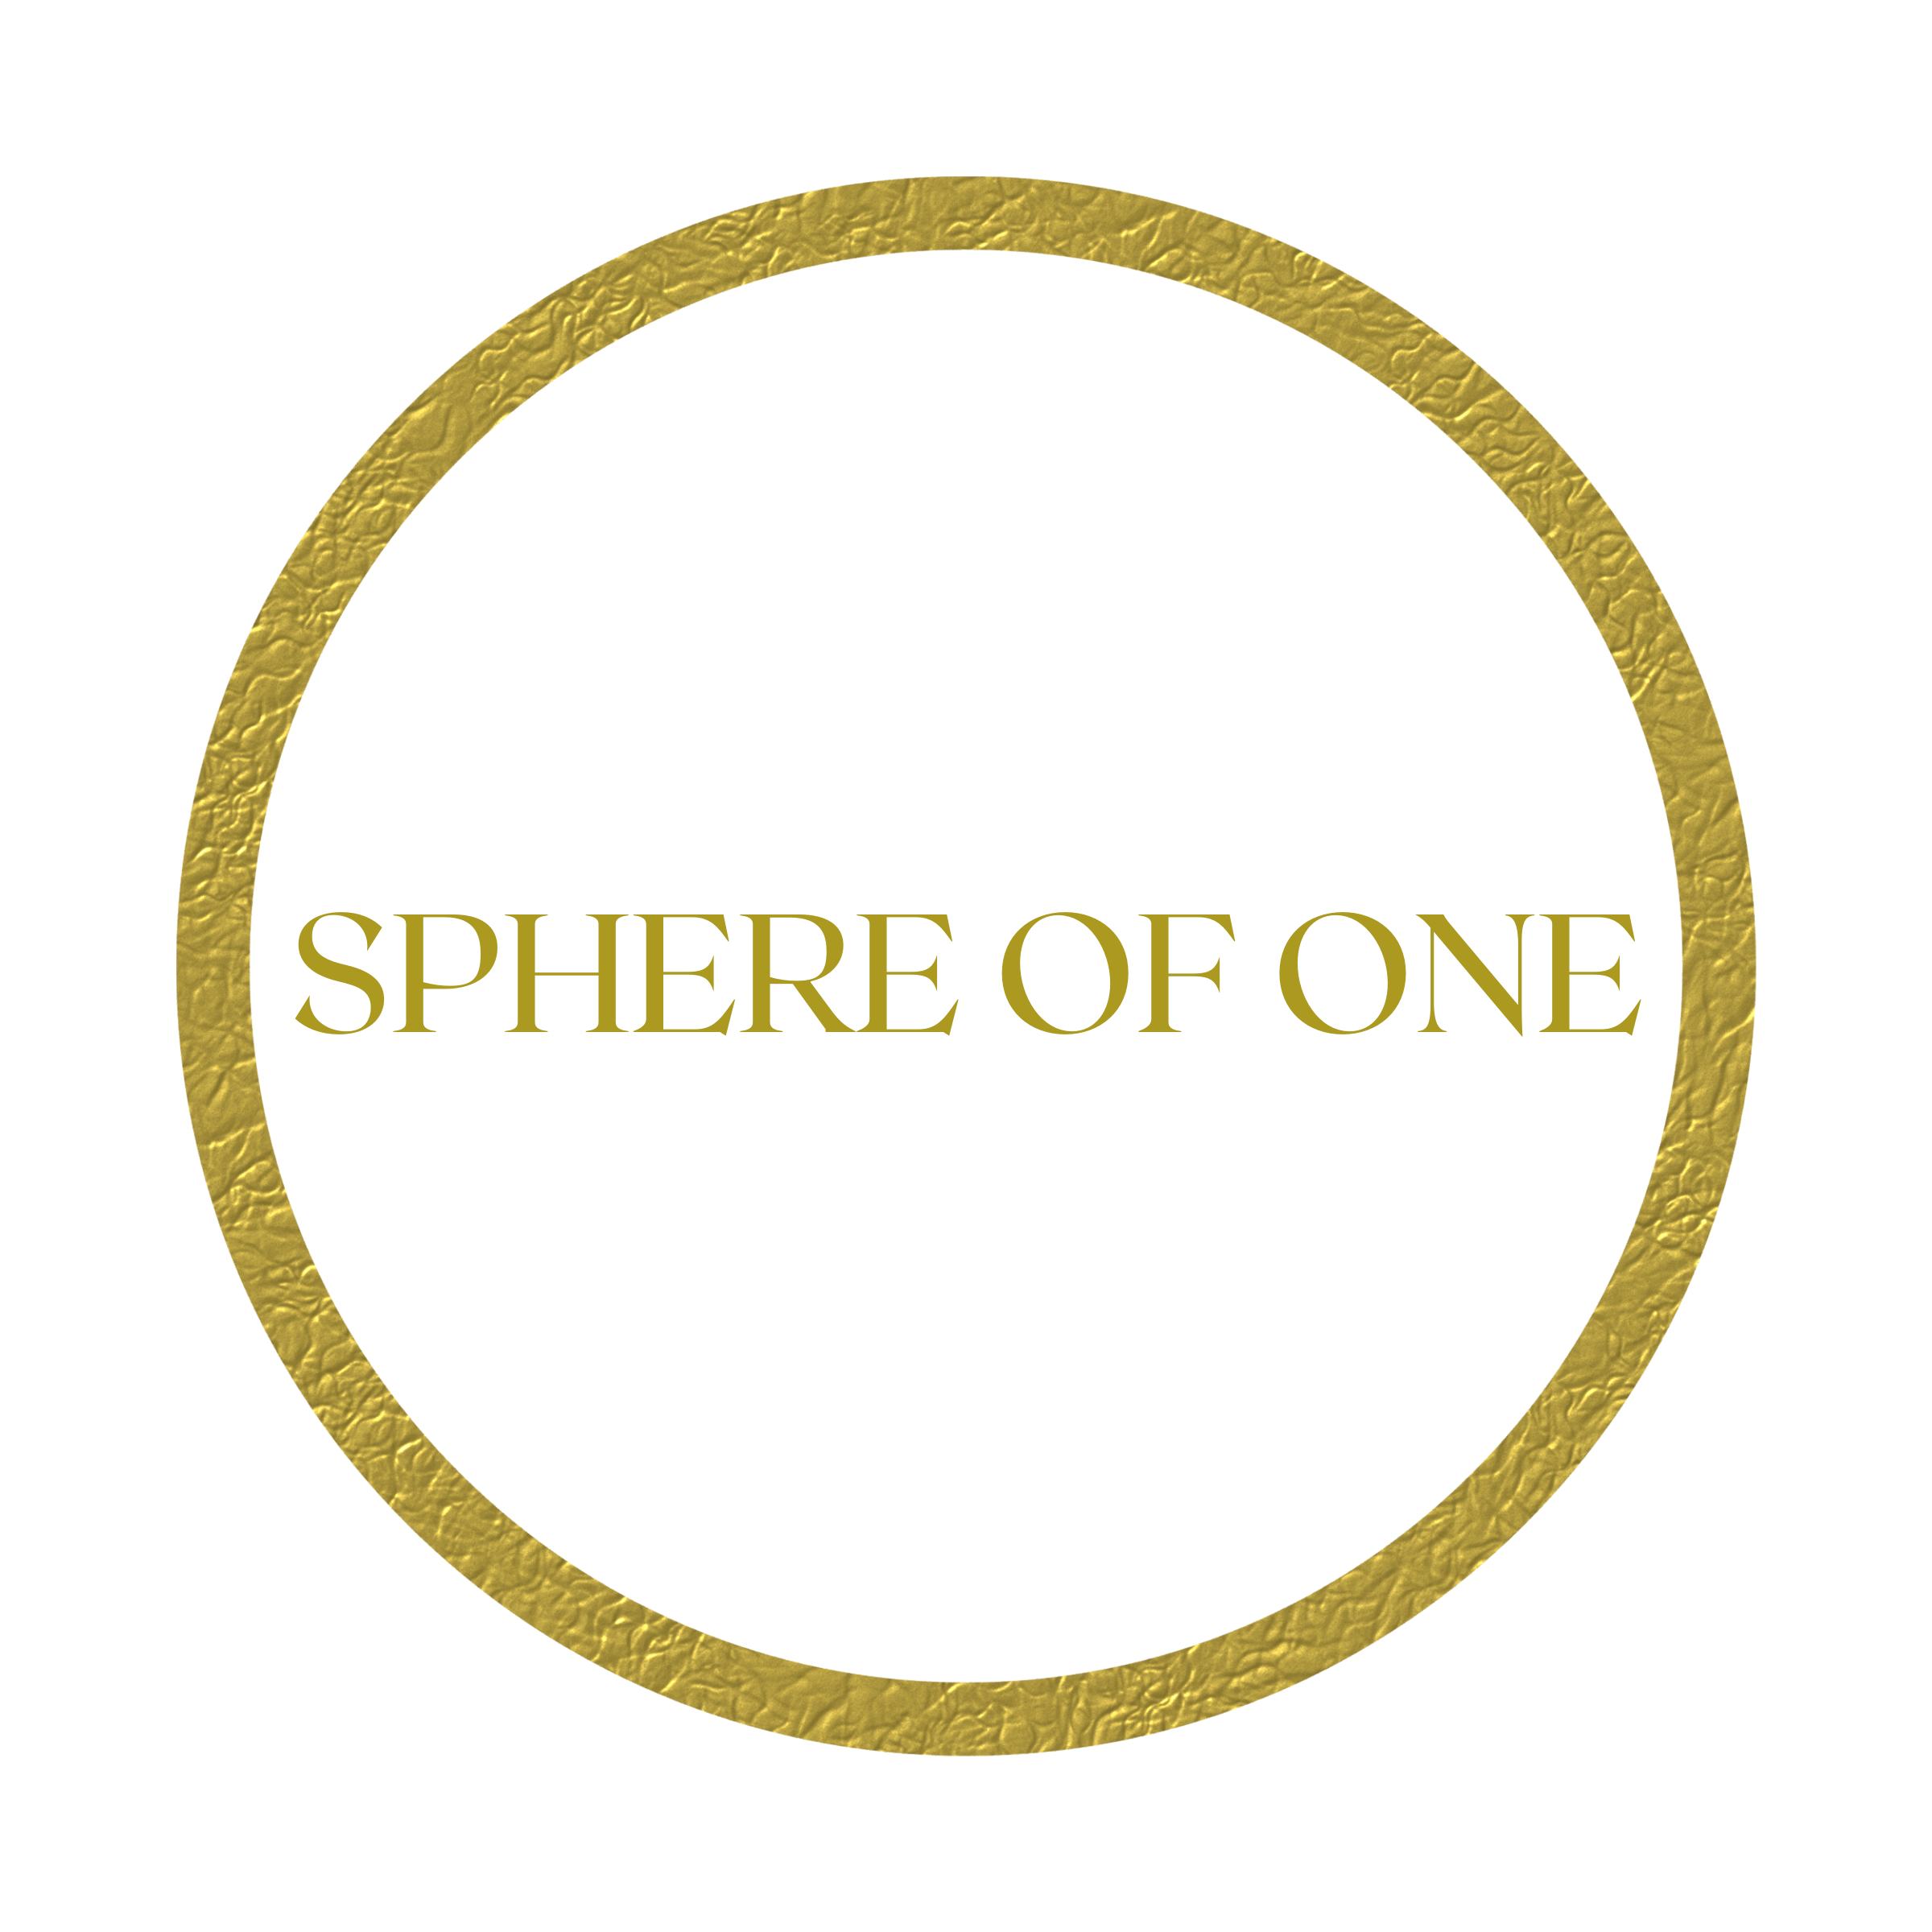 342-sphere-of-one-logo-3-lighter-gold2400-×-2400-px-16668067481027.png